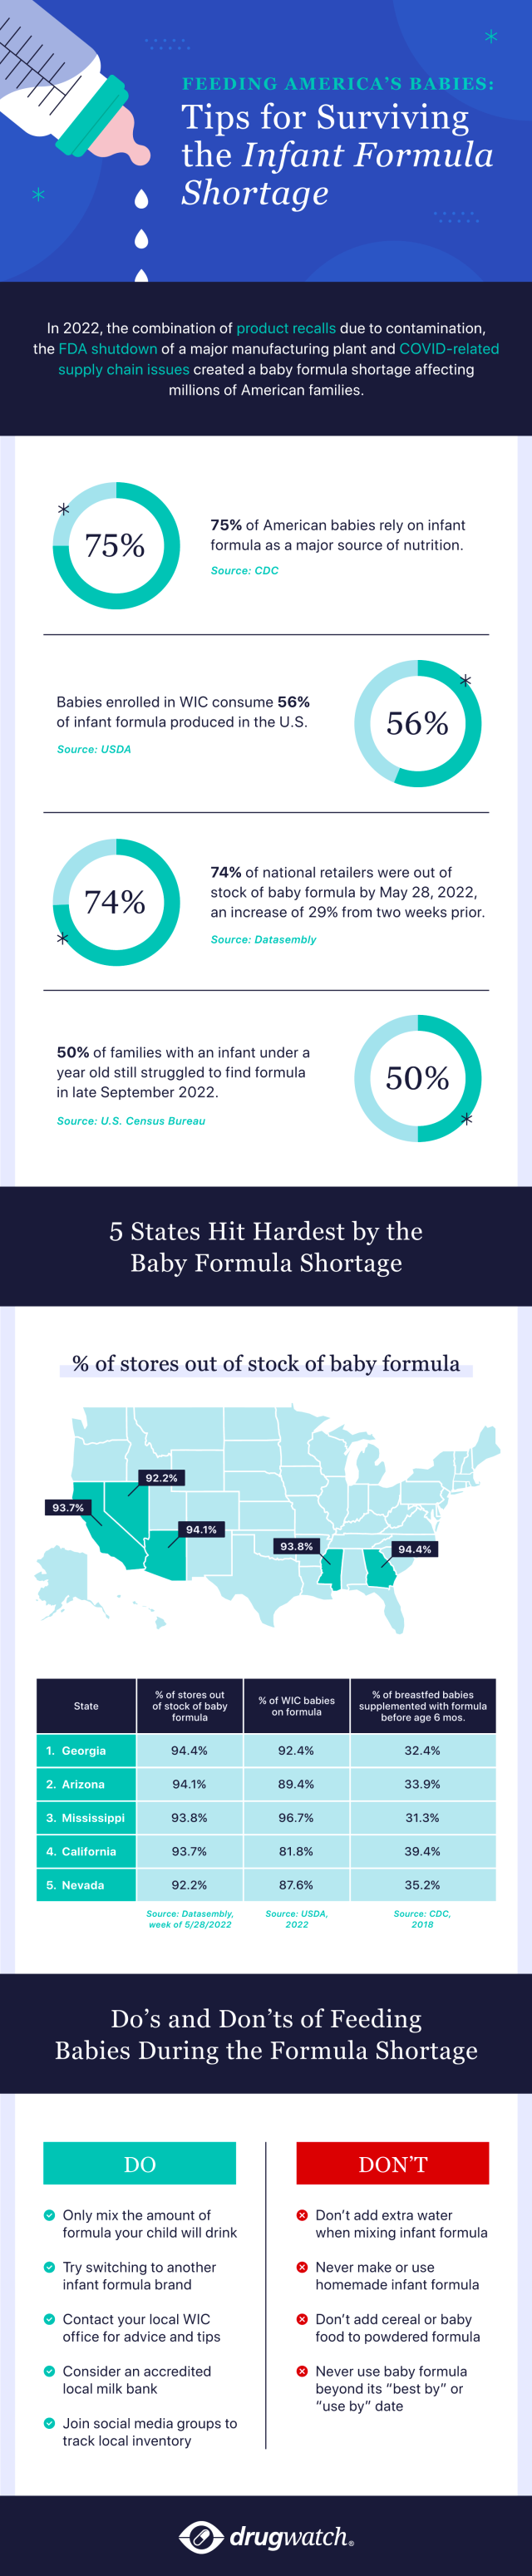 Infographic on tips for dealing with baby formula shortages